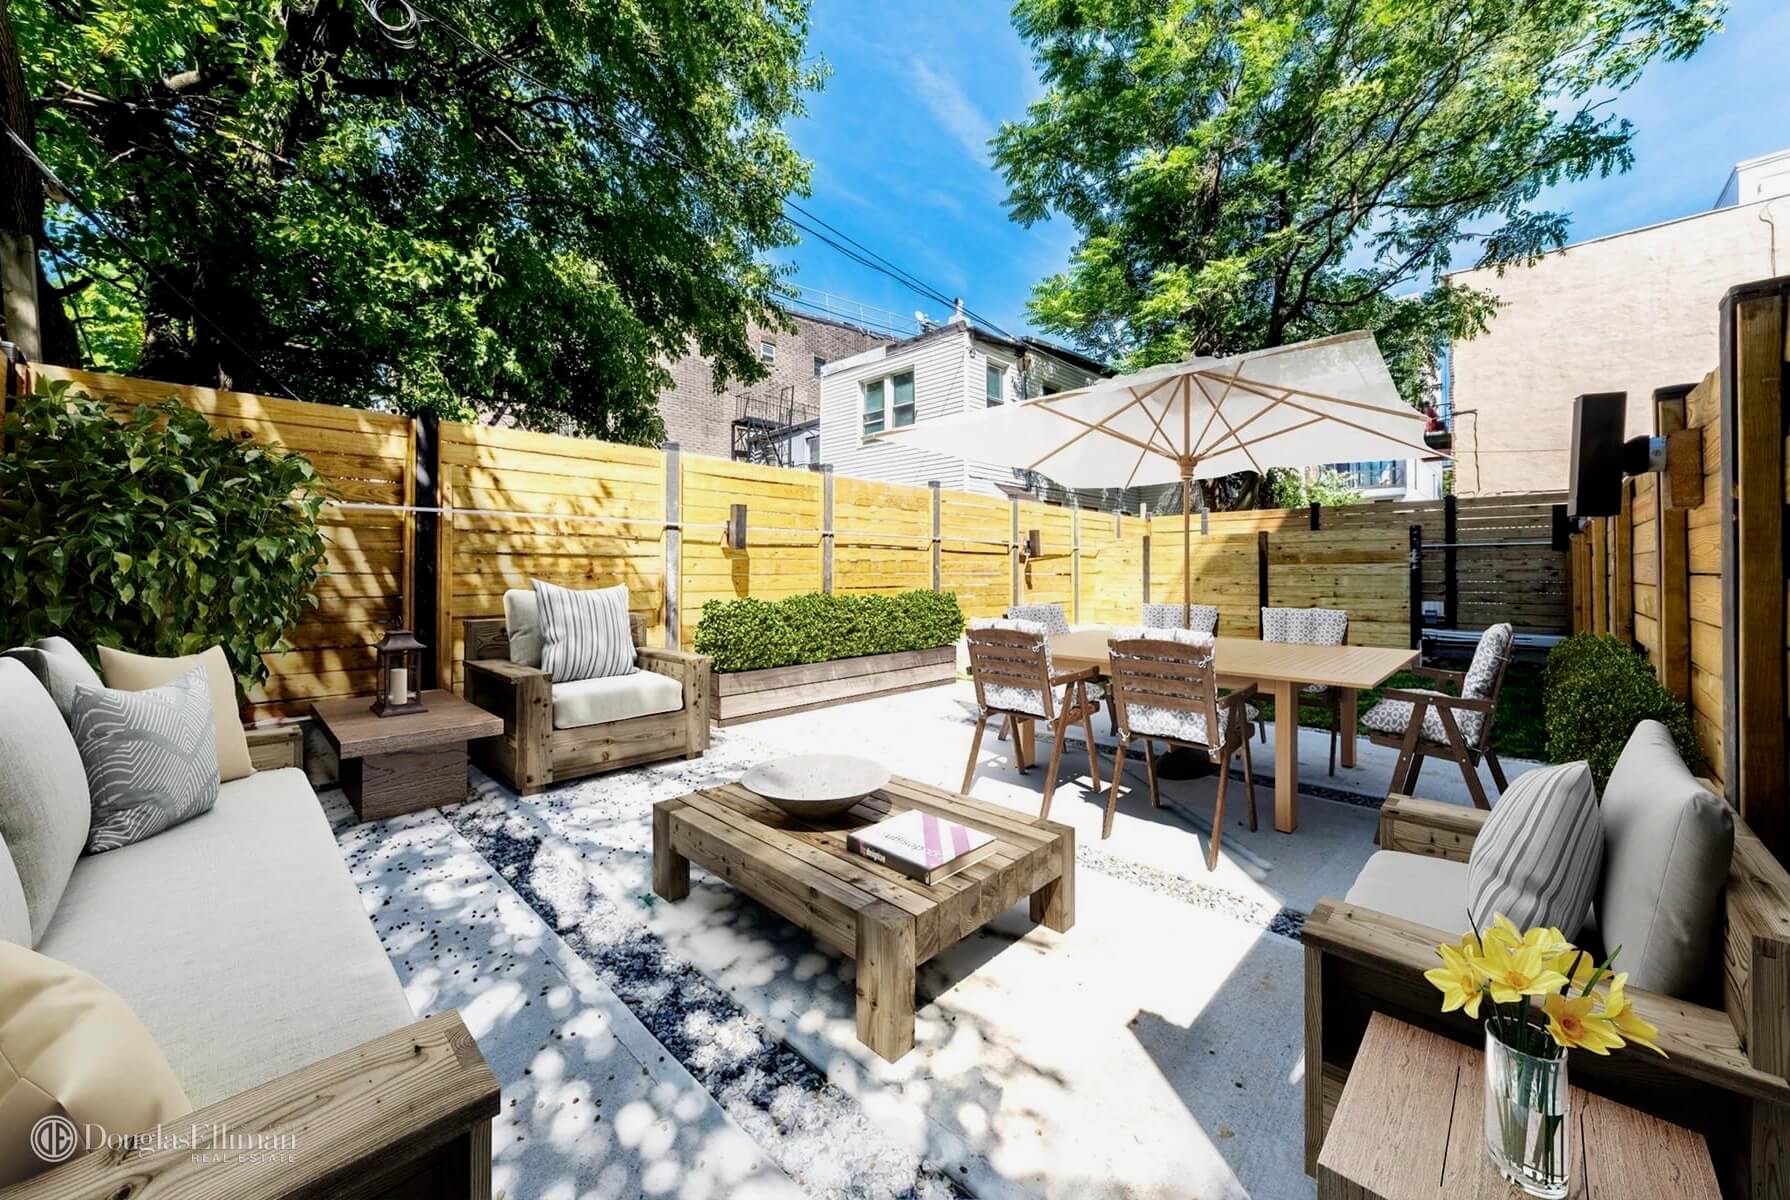 Brooklyn-apartment-for-sale-in-Bushwick-267-Evergreen-Ave-3A-11